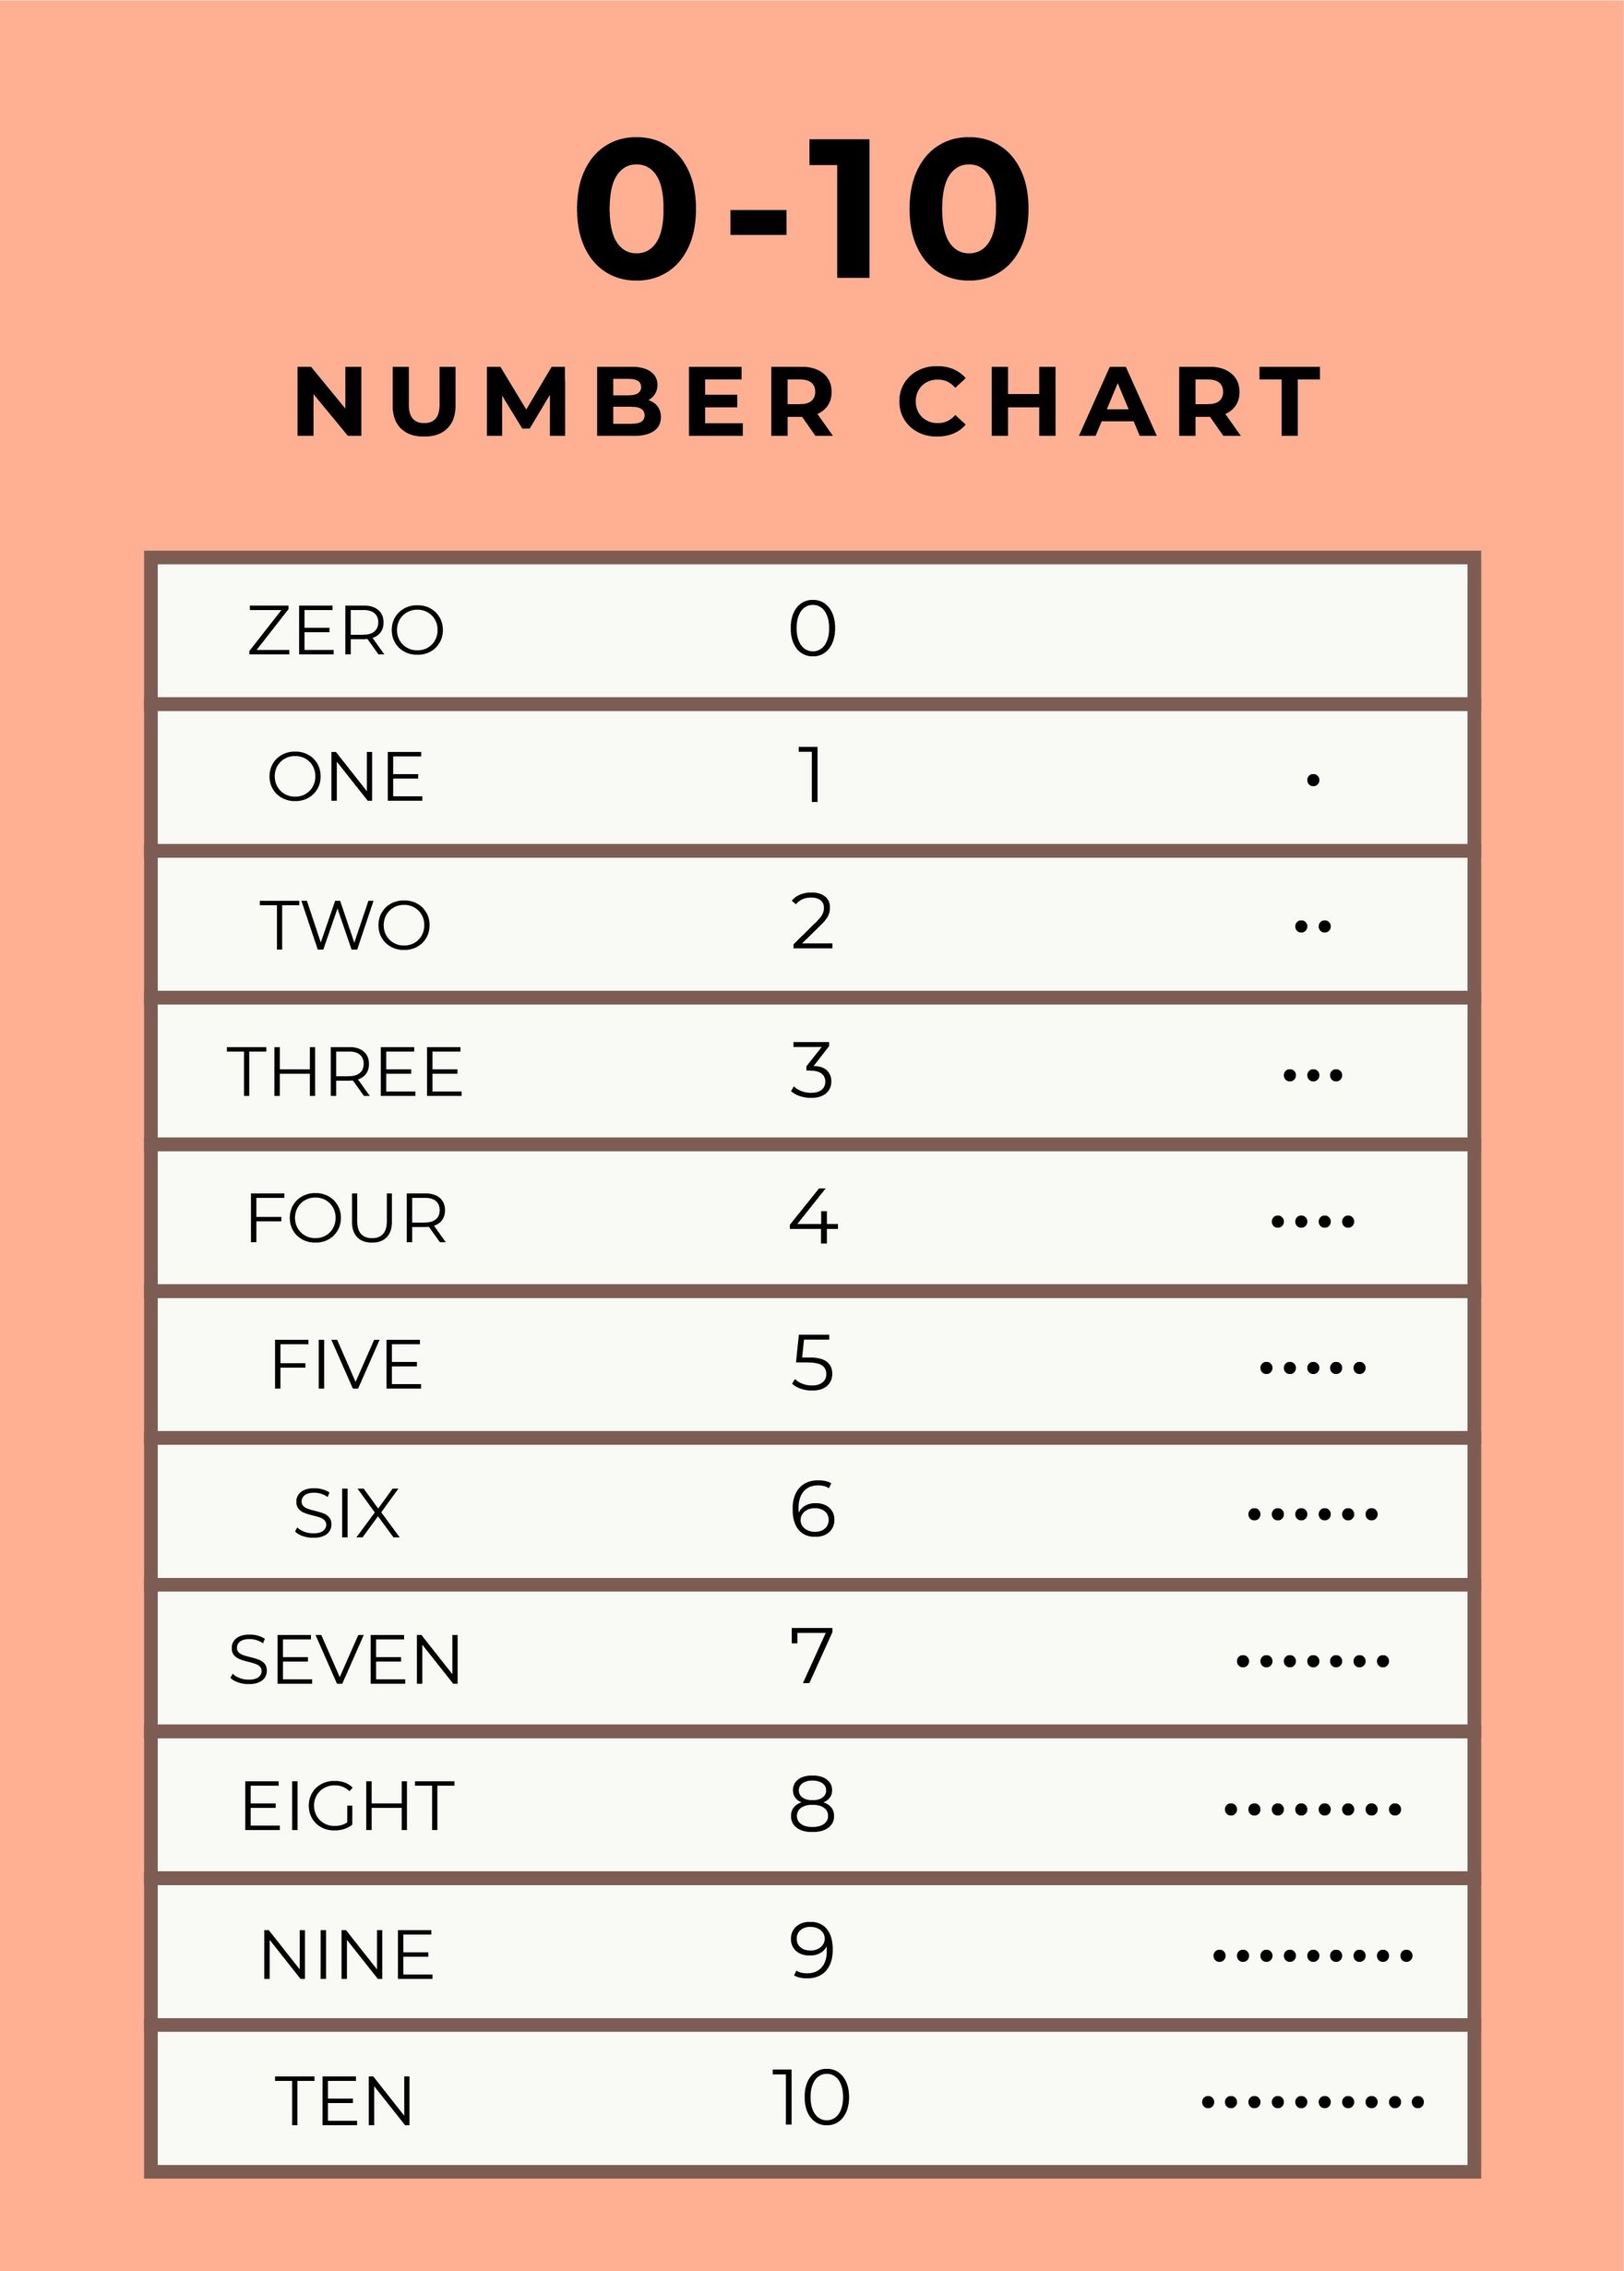 0-10 Number Chart